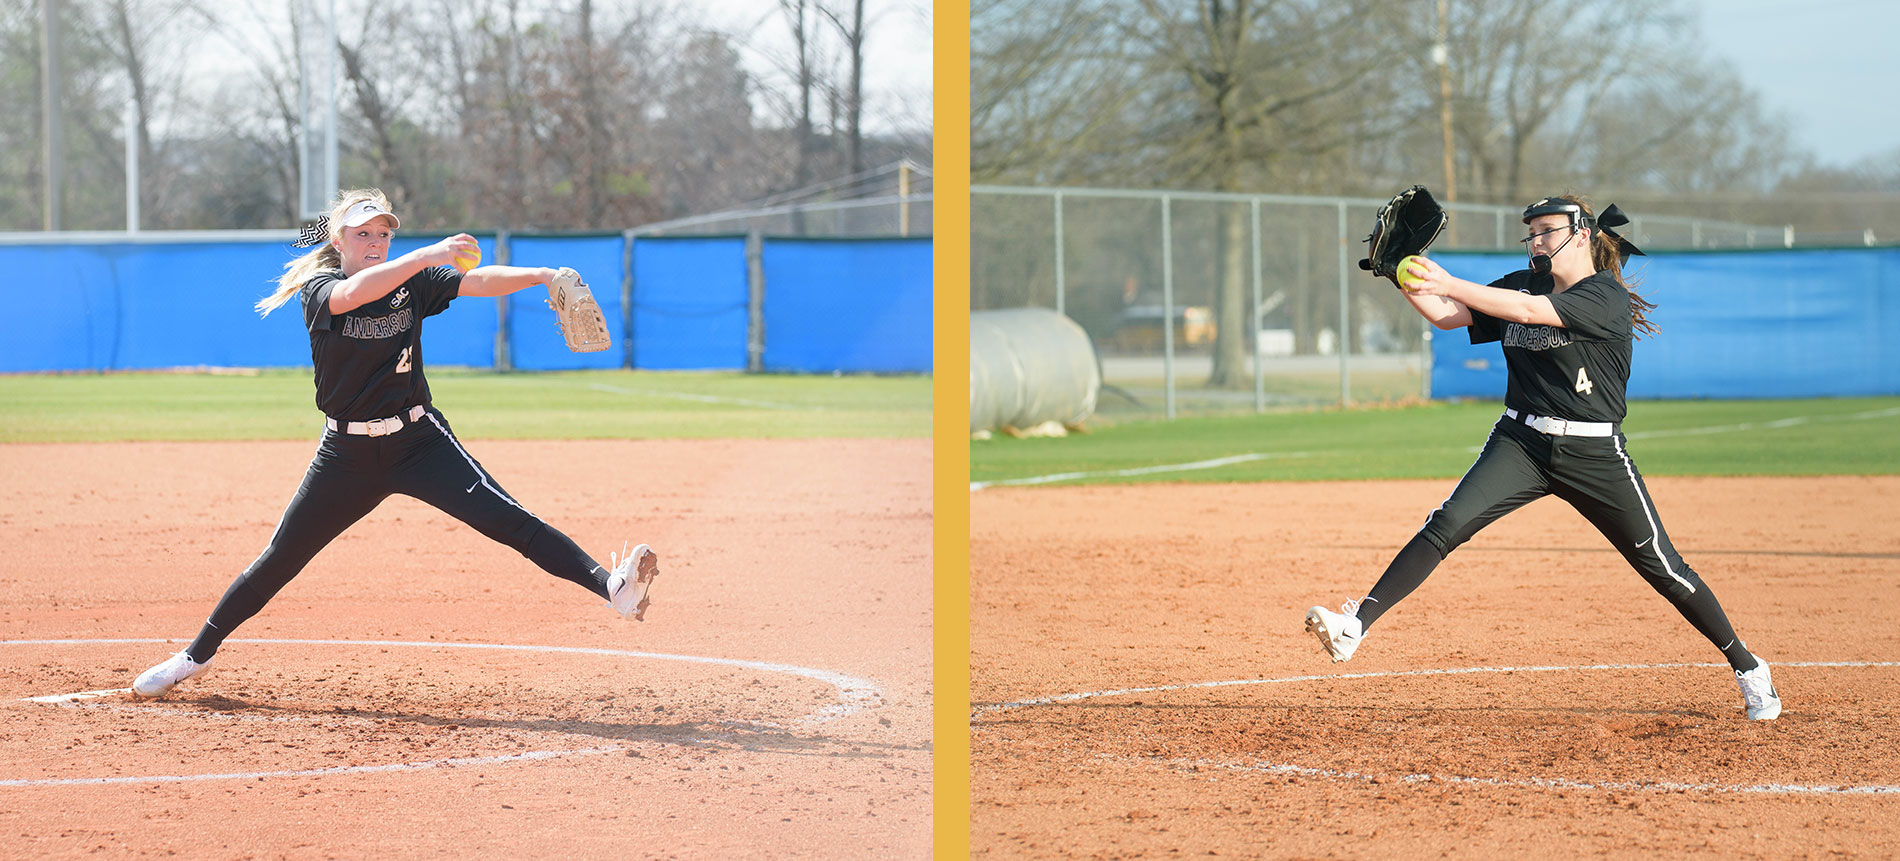 Trojans Open South Atlantic Conference Play with Doubleheader Sweep over Coker